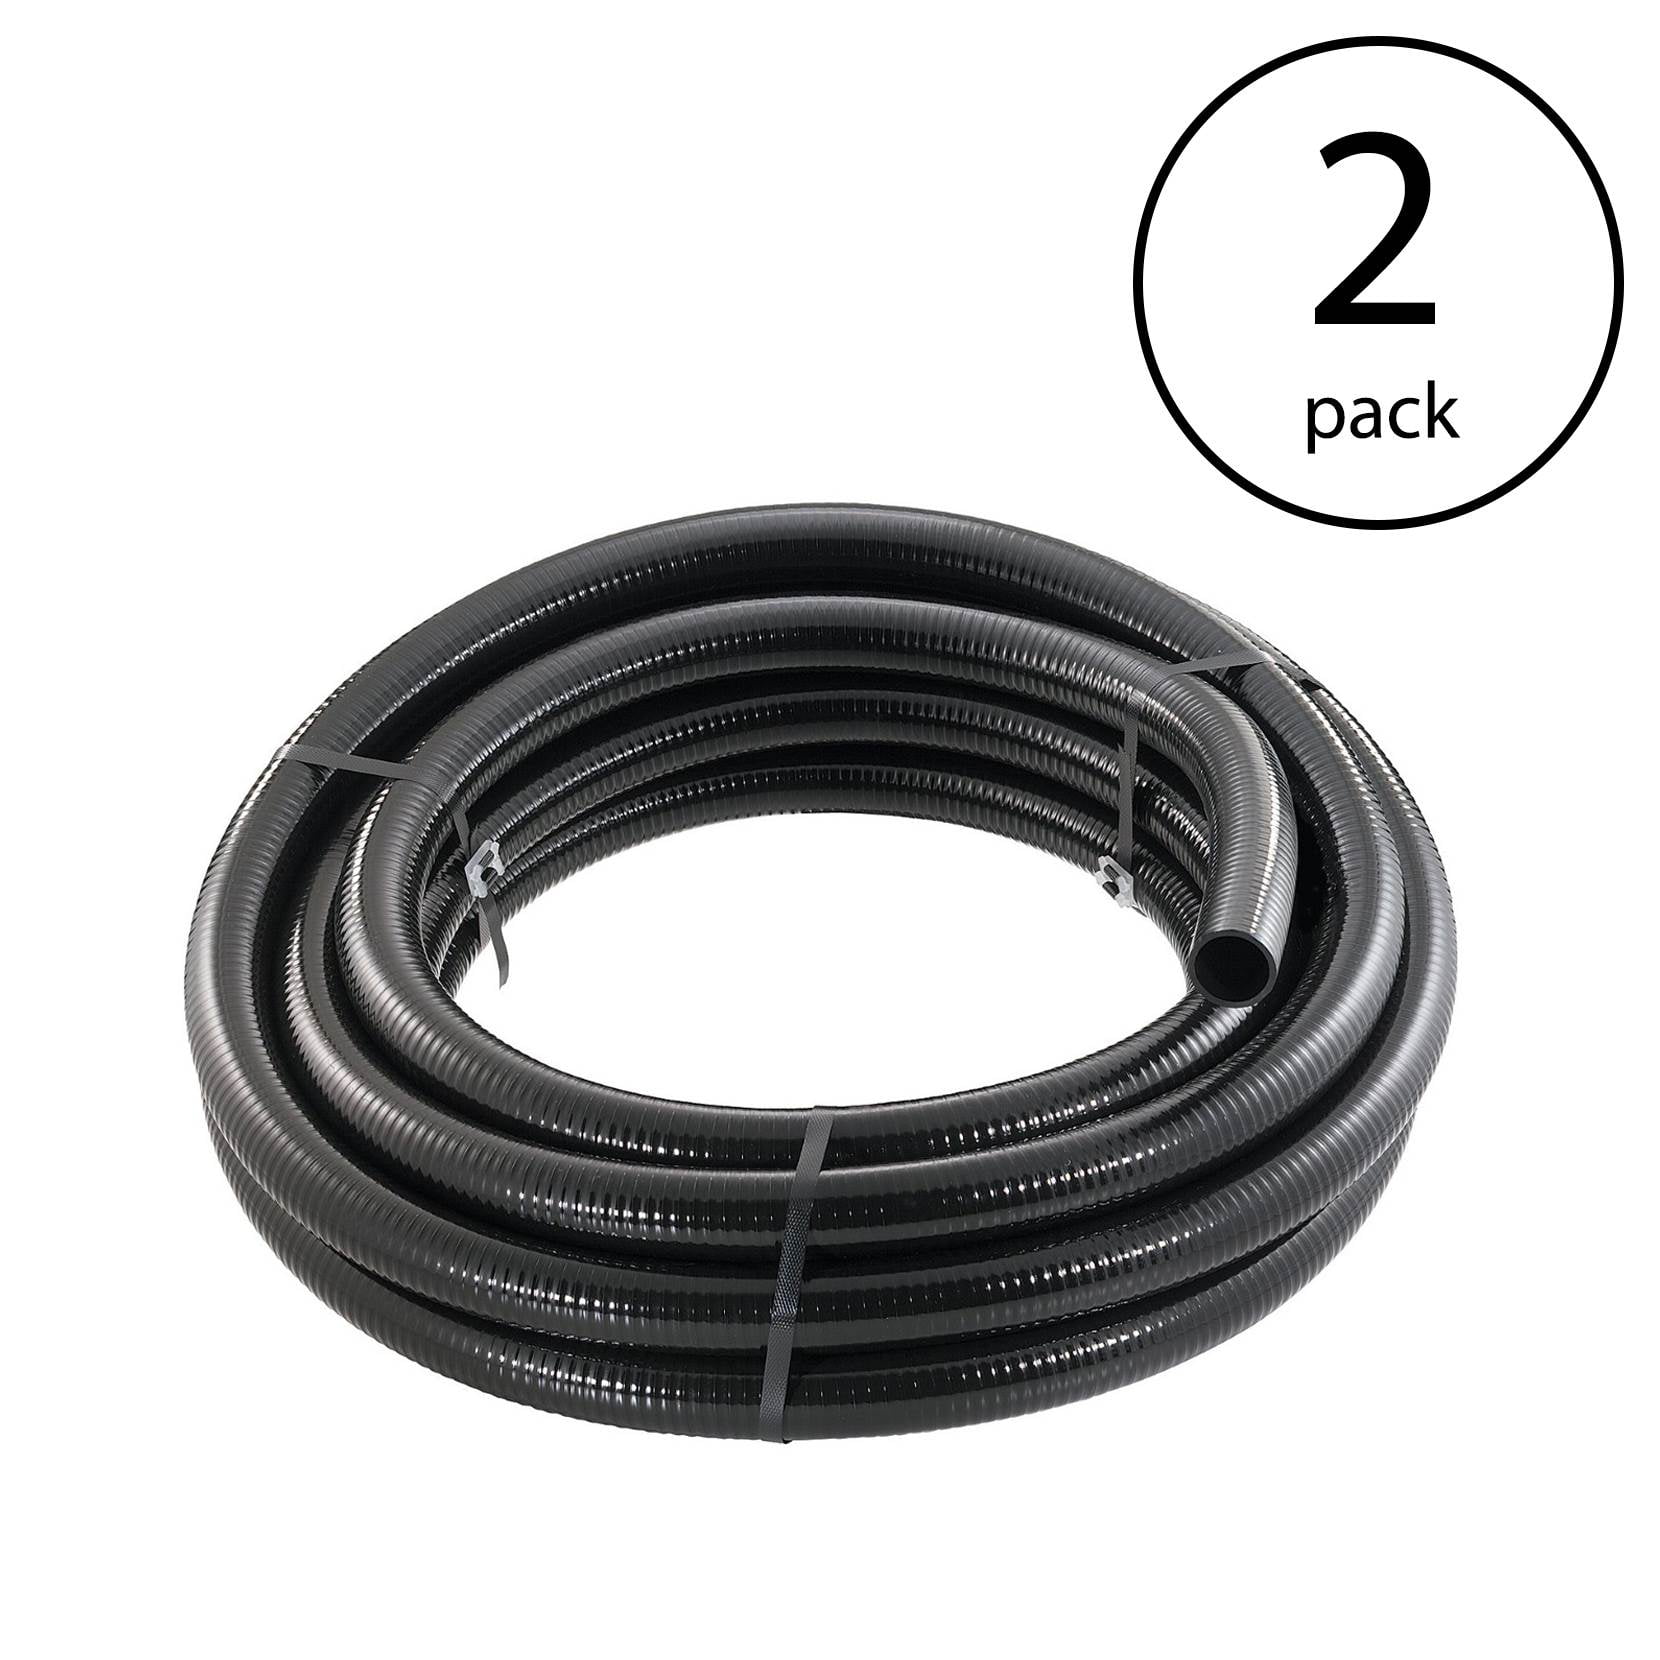 Flexible Pond Filter Hose Pipe Flexi 5m of 1.25" 32mm 